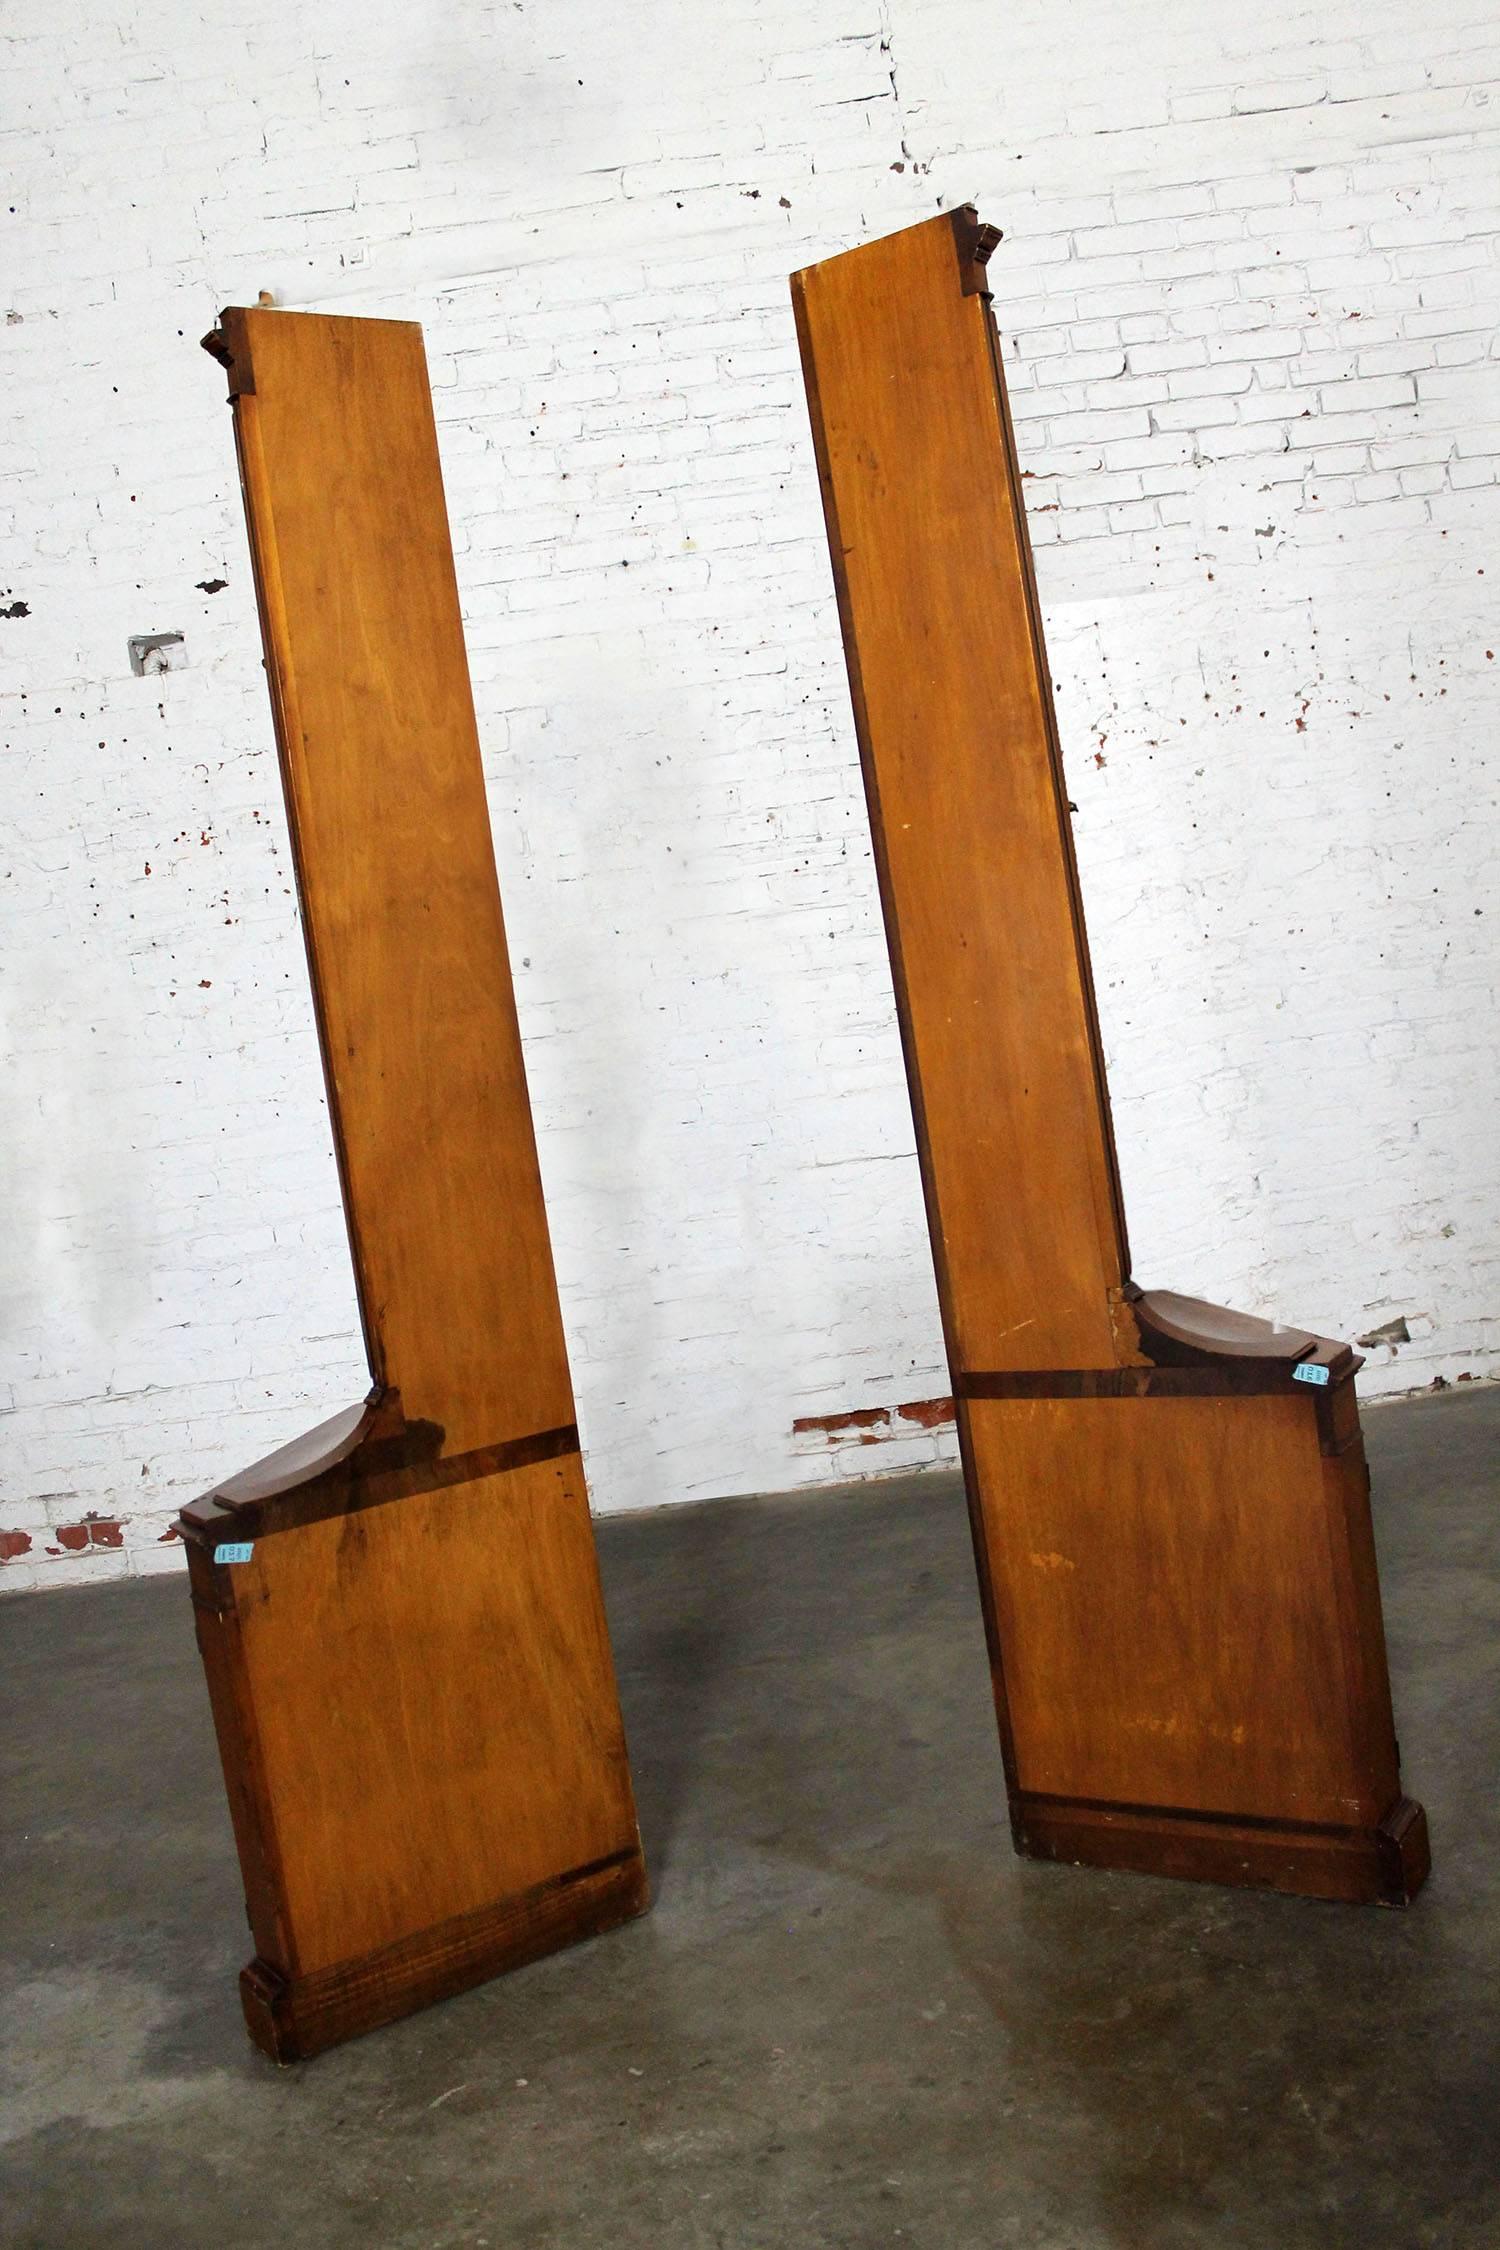 Extraordinary pair of distressed knotty pine corner display cabinets made by Weiman Heirloom quality tables. These beautiful cabinets are in wonderful vintage condition, circa 1950s.

These Georgian style corner cabinets, that may once have been